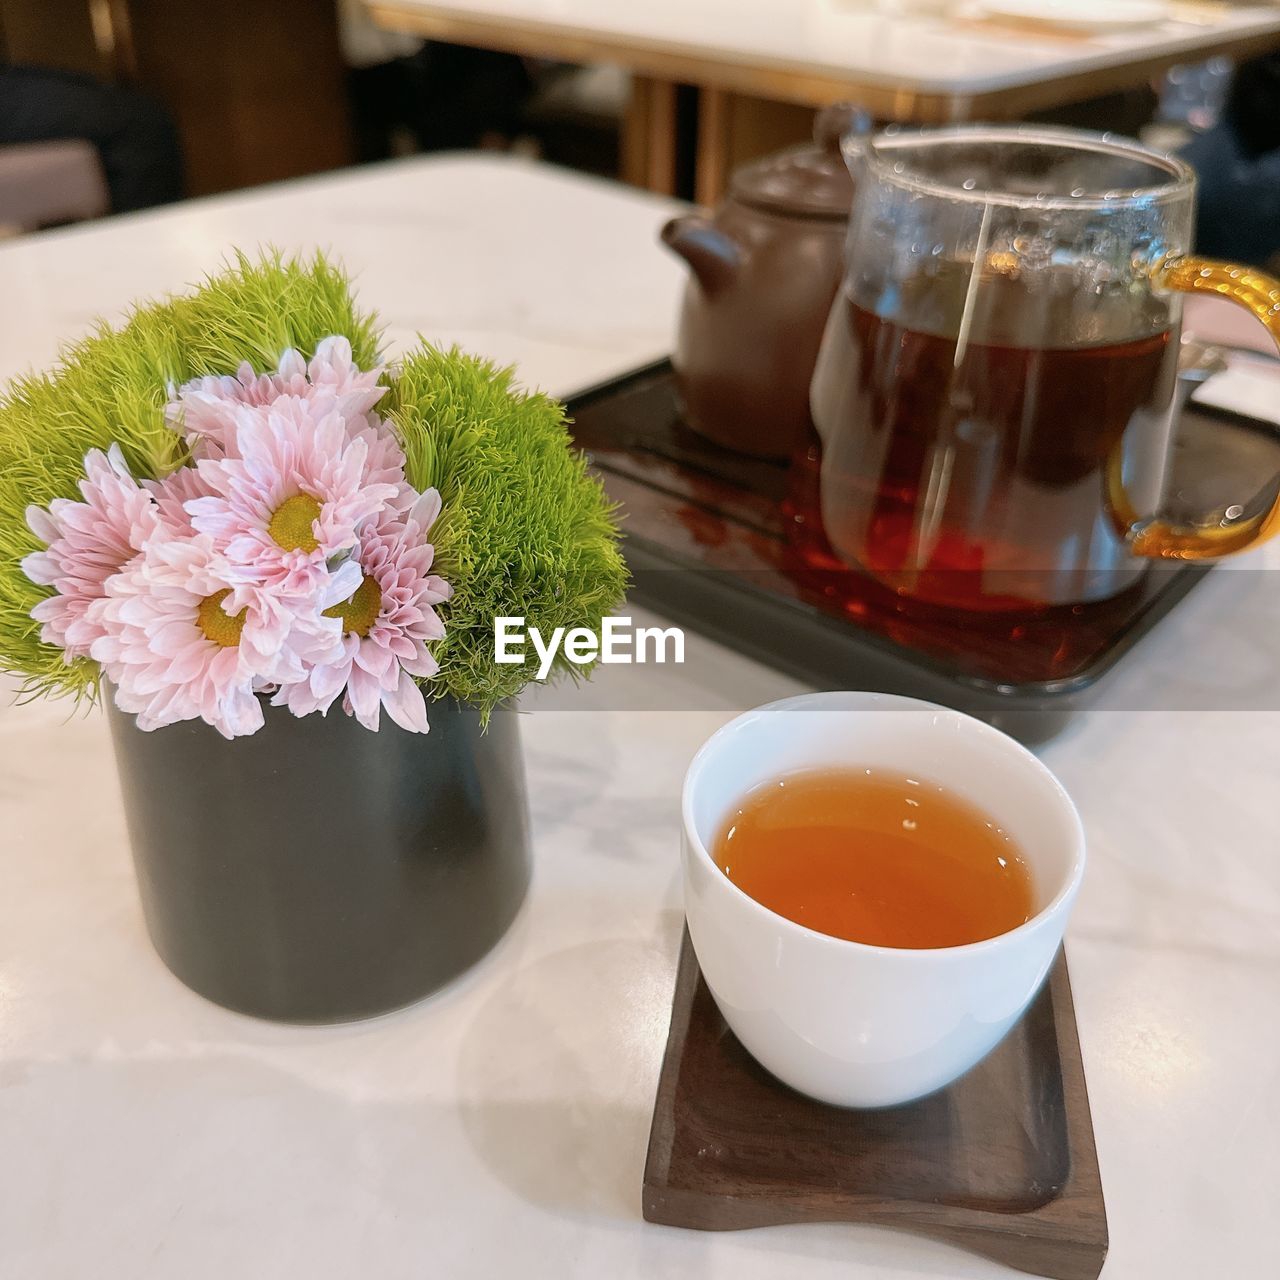 flower, flowering plant, drink, food and drink, plant, tea, mug, hot drink, cup, table, freshness, refreshment, nature, tea cup, no people, indoors, crockery, food, beauty in nature, meal, tableware, flower head, still life, da hong pao, flower arrangement, furniture, coffee